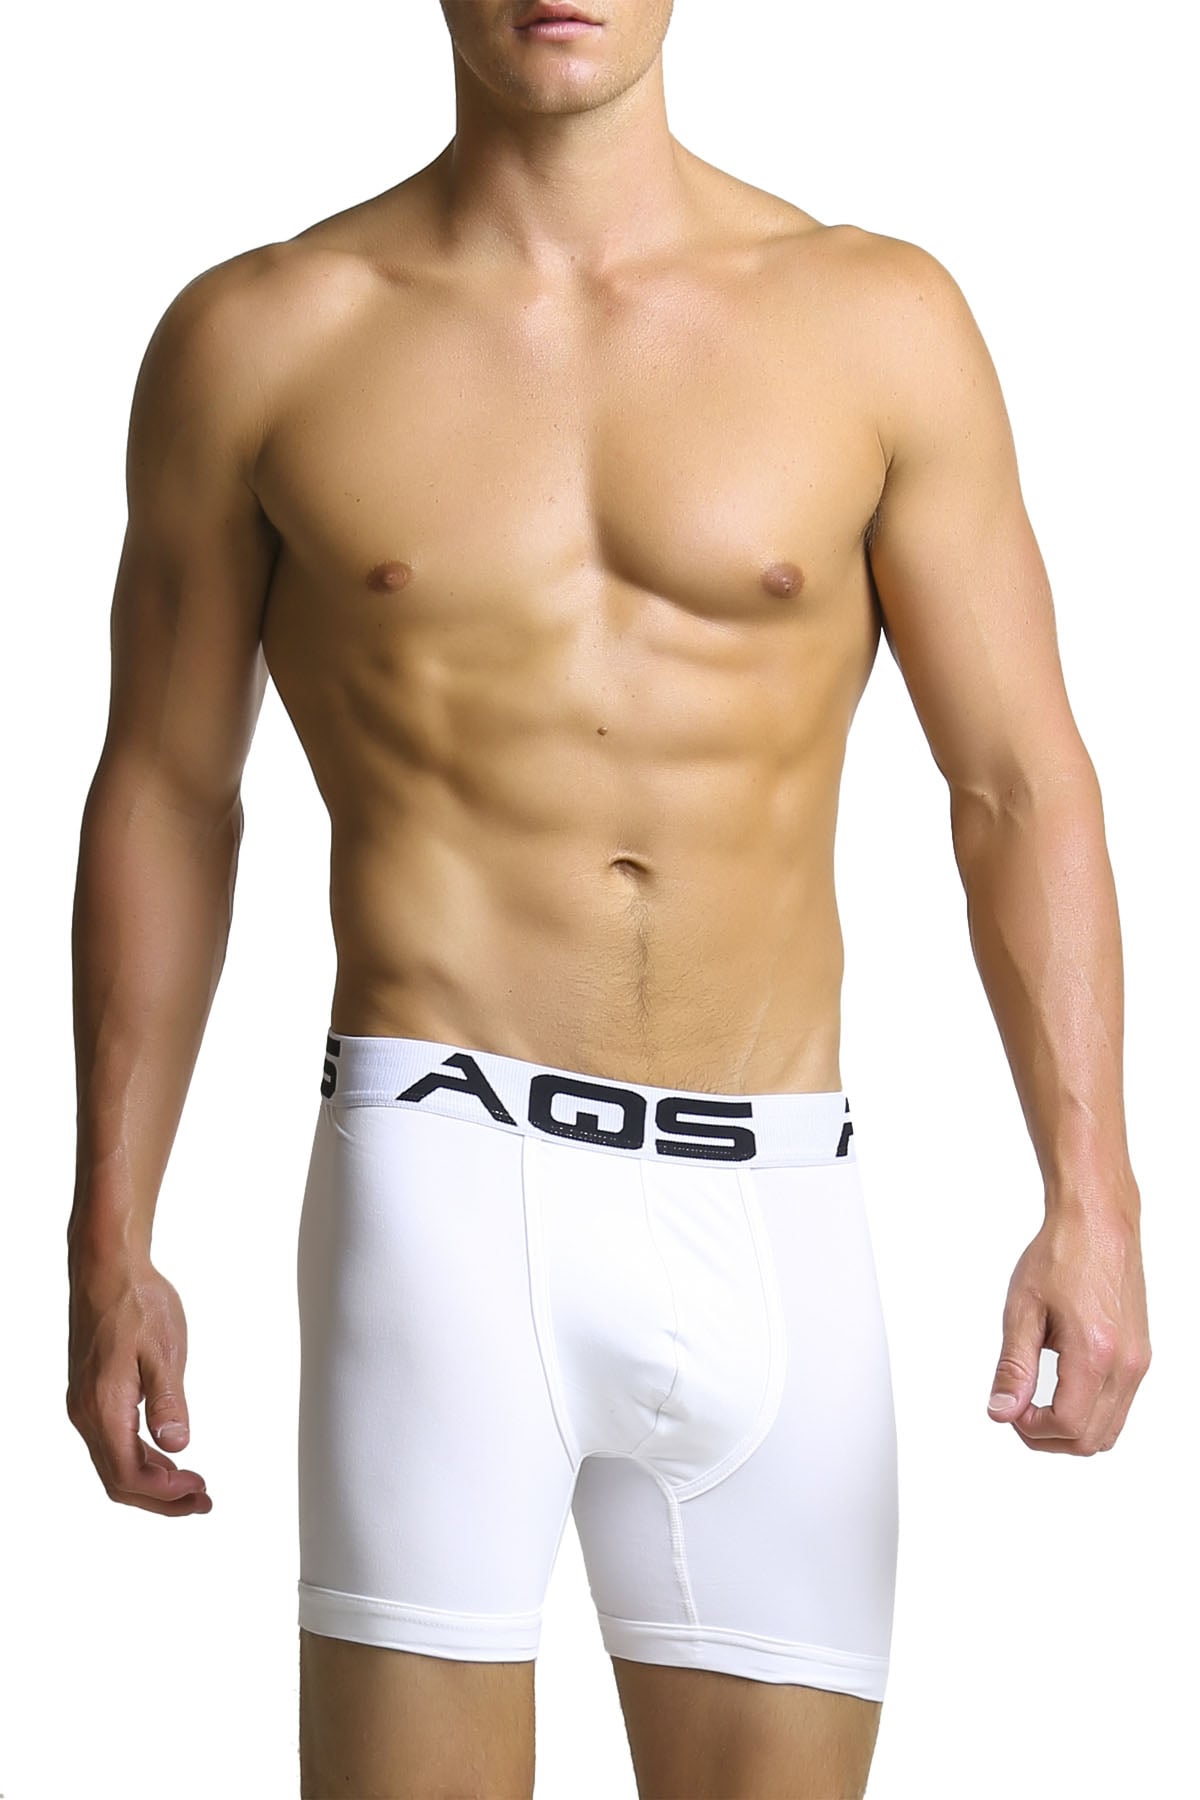 AQS Red/Black/White Boxer Brief 3-Pack